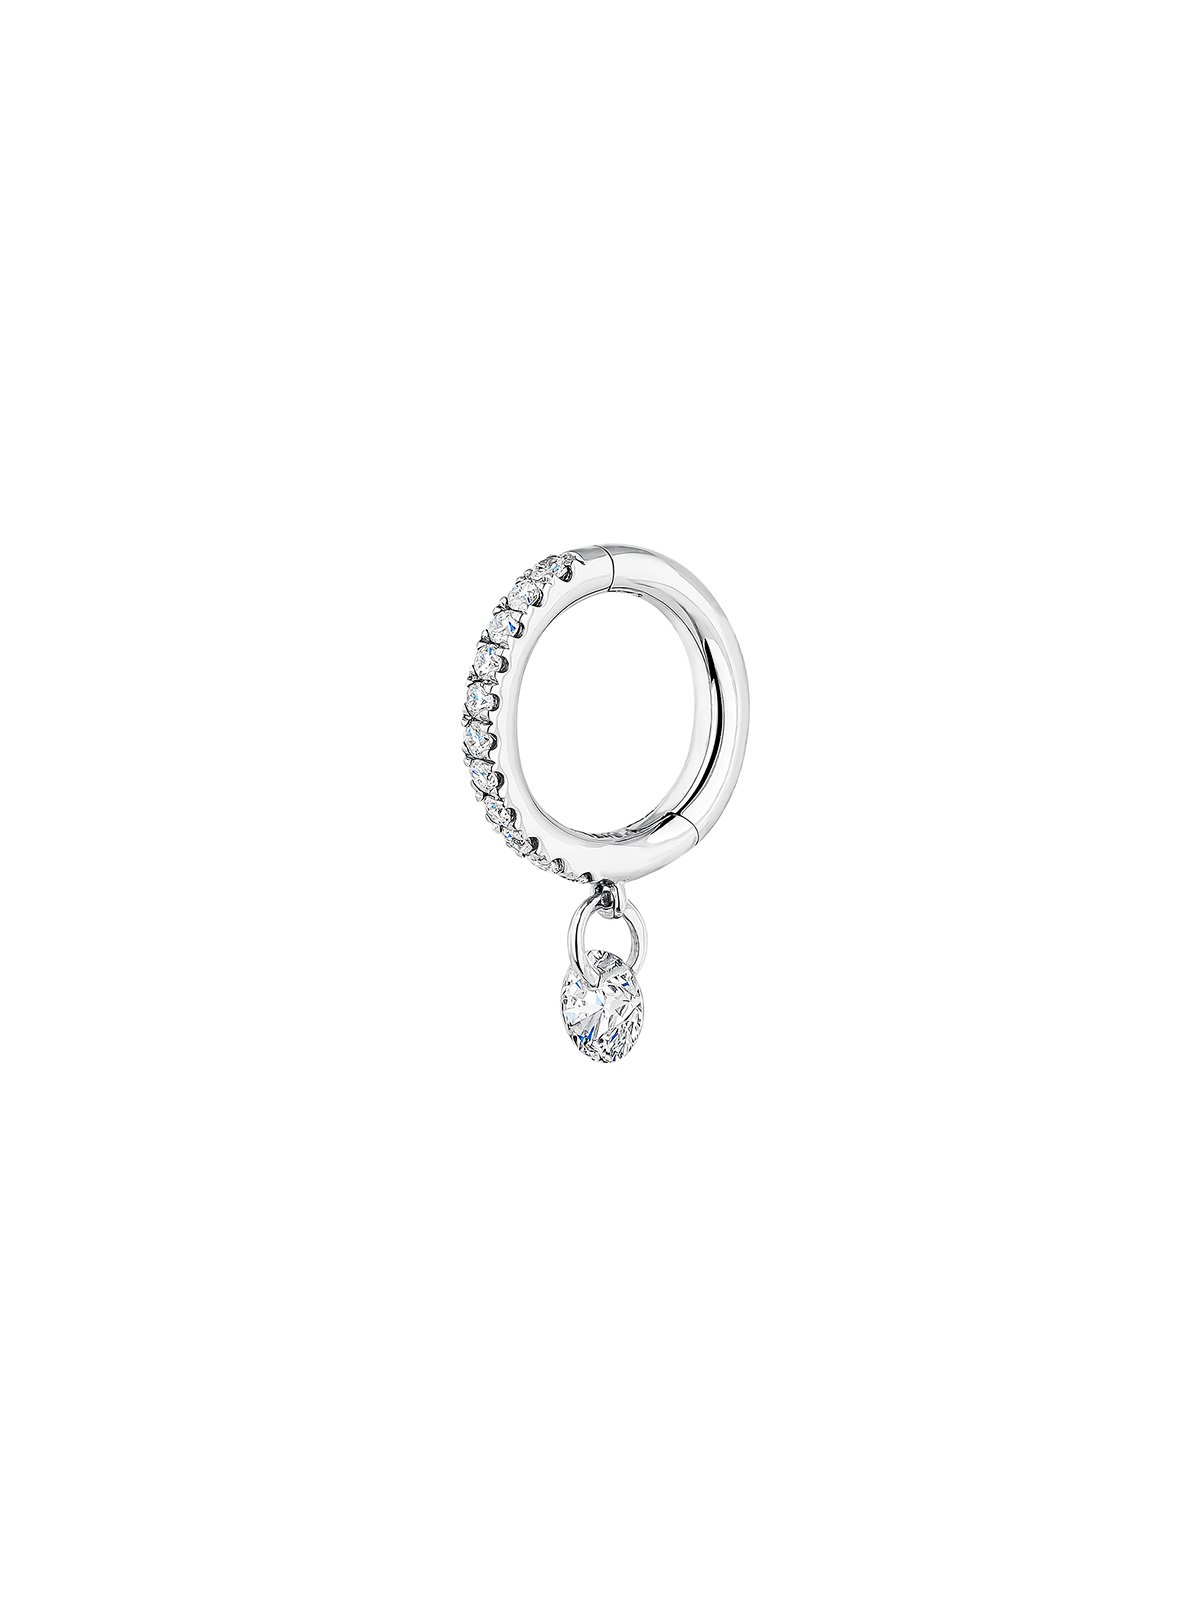 Individual small hoop earring made of 18K white gold with white diamonds.